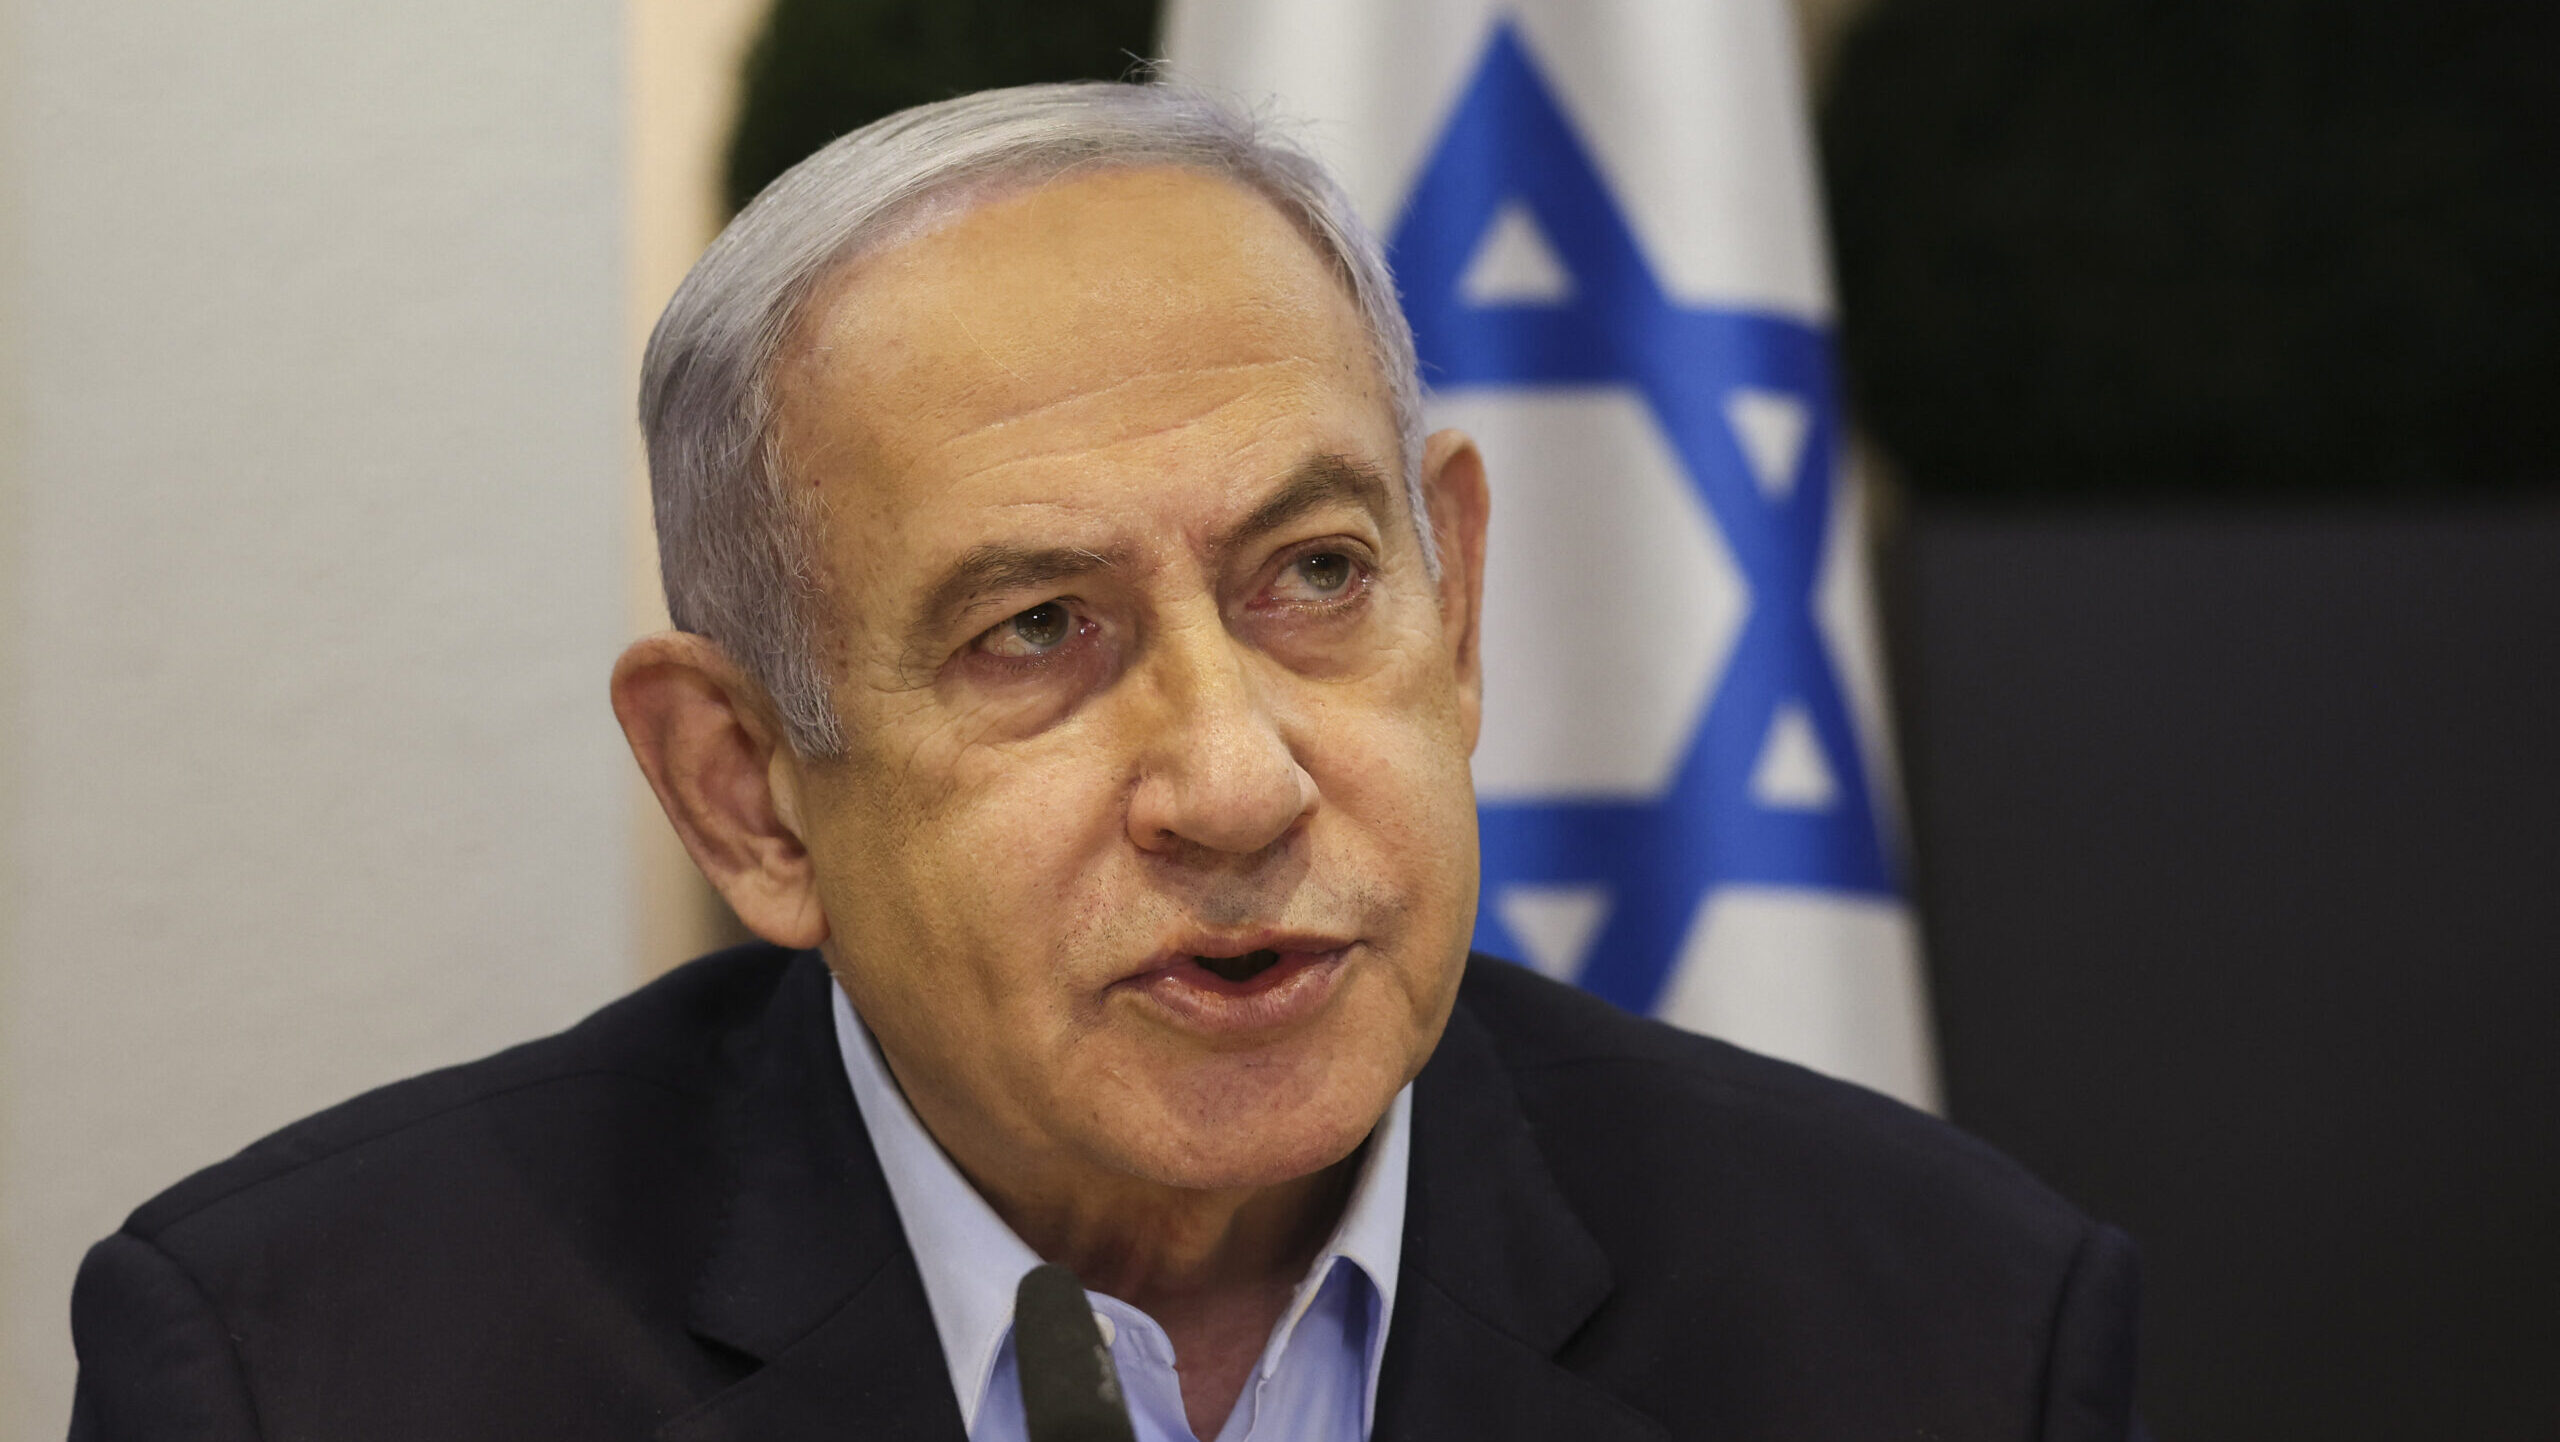 Prime Minister Netanyahu Clarifies Stance on Palestinian State Amid Conflicting Reports